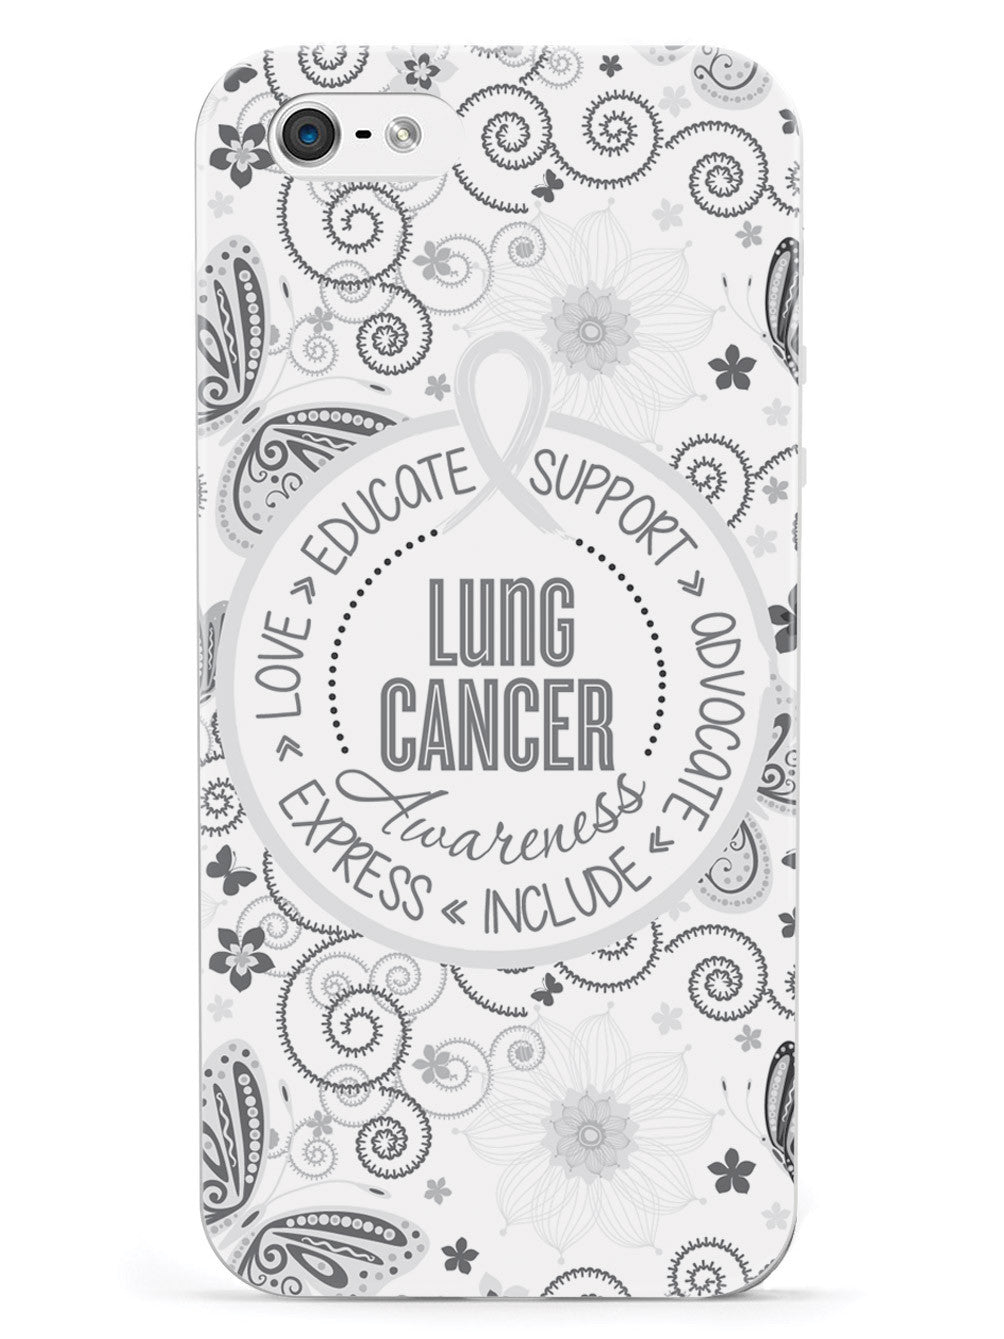 Lung Cancer - Butterfly Pattern Case